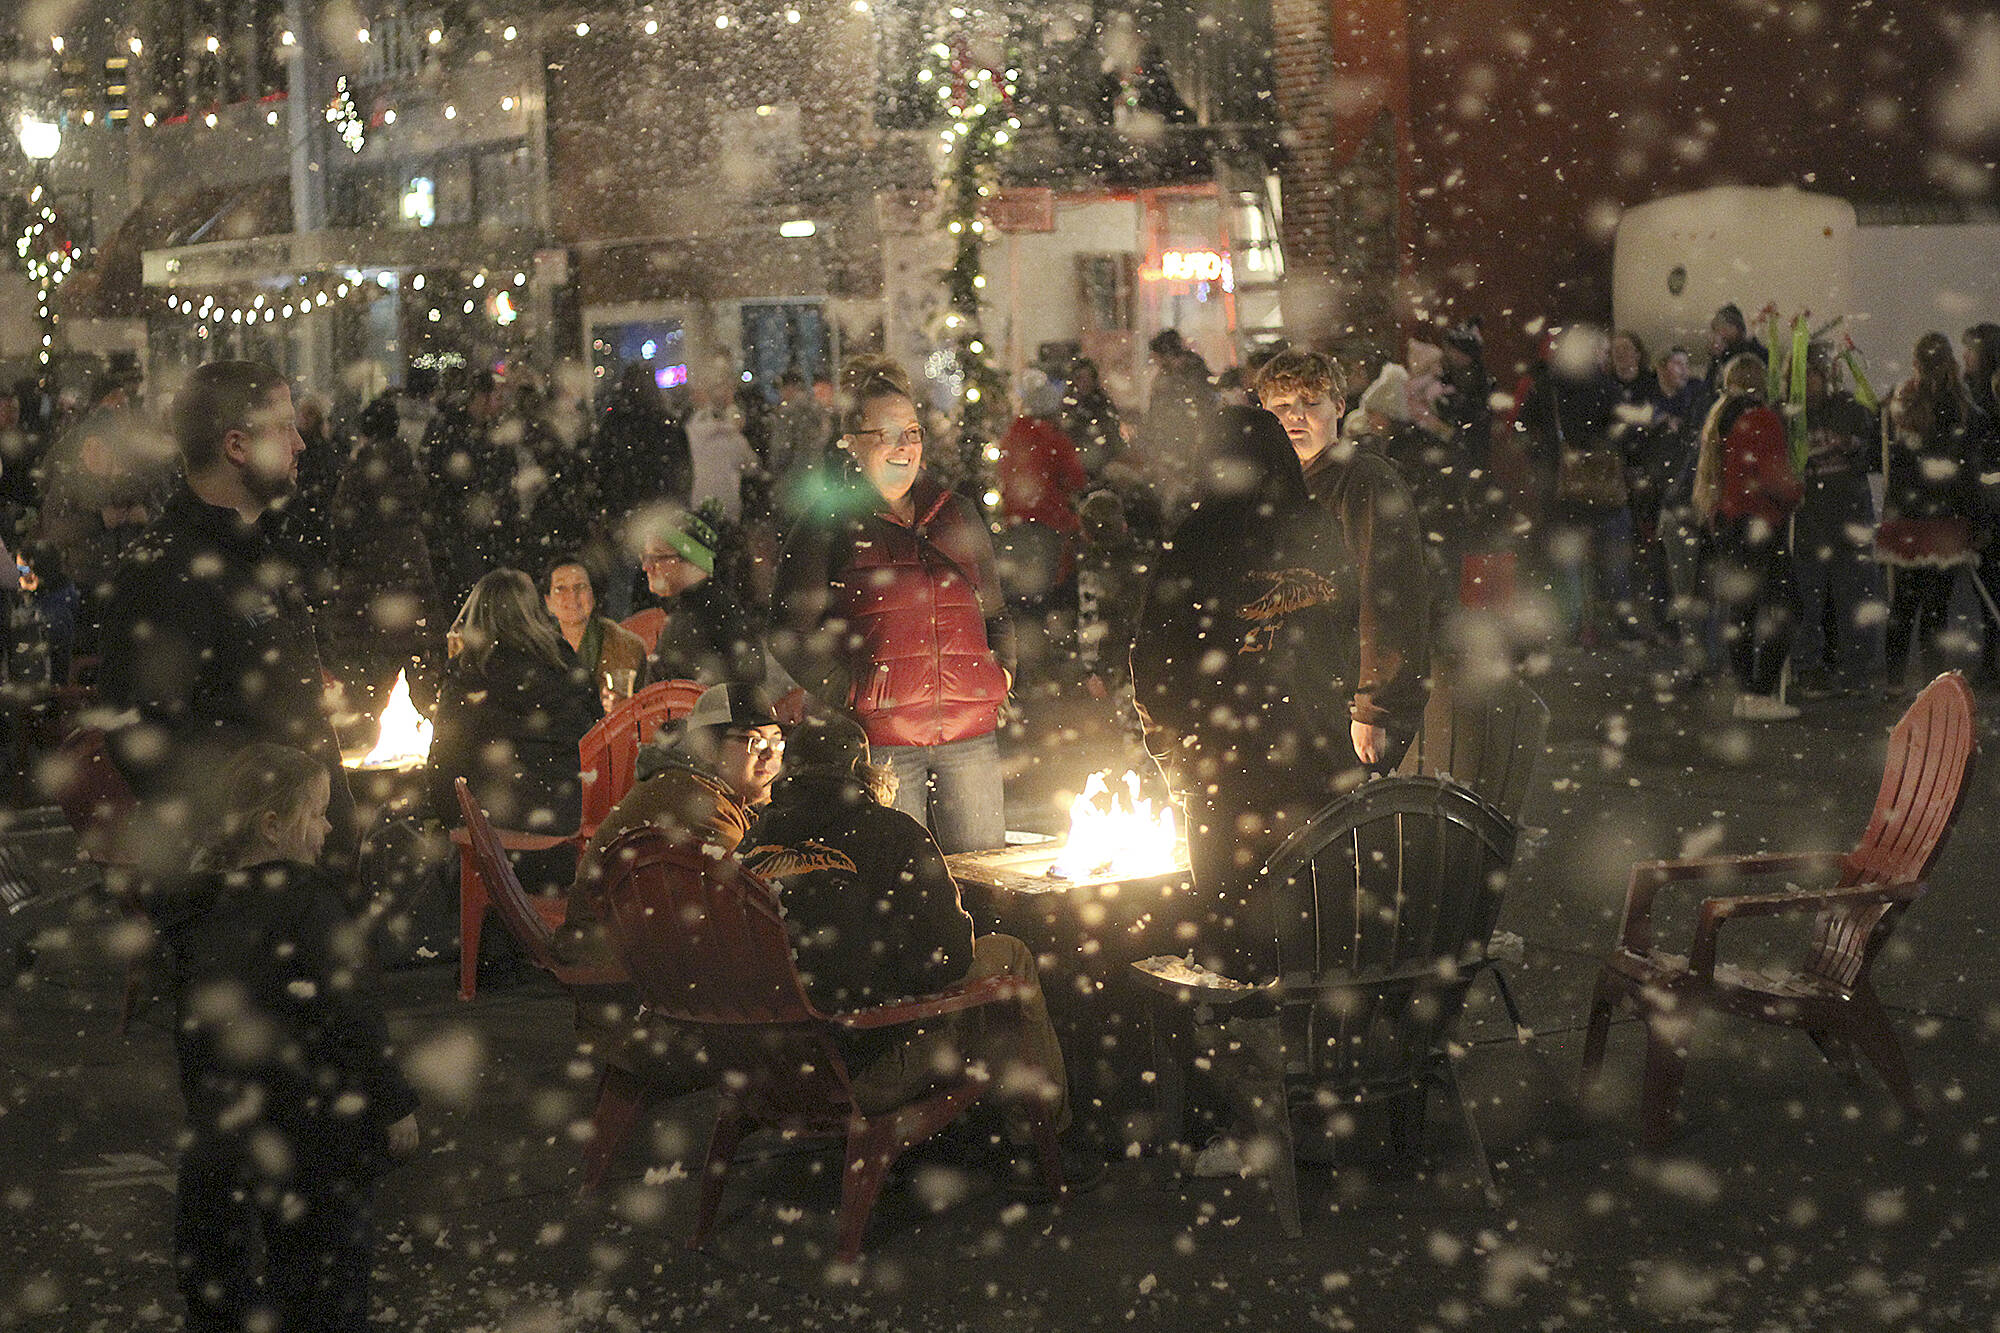 Visitors to Cole Street have been enjoying weekly "snow" events every Friday from 5 to 5:30, when portions of the street close to allow folks to enjoy food and drinks outdoors around fire pits (if the weather is clear). Going into January, the snow events are expected to move to Saturdays at the same time. Photo by Ray Miller-Still